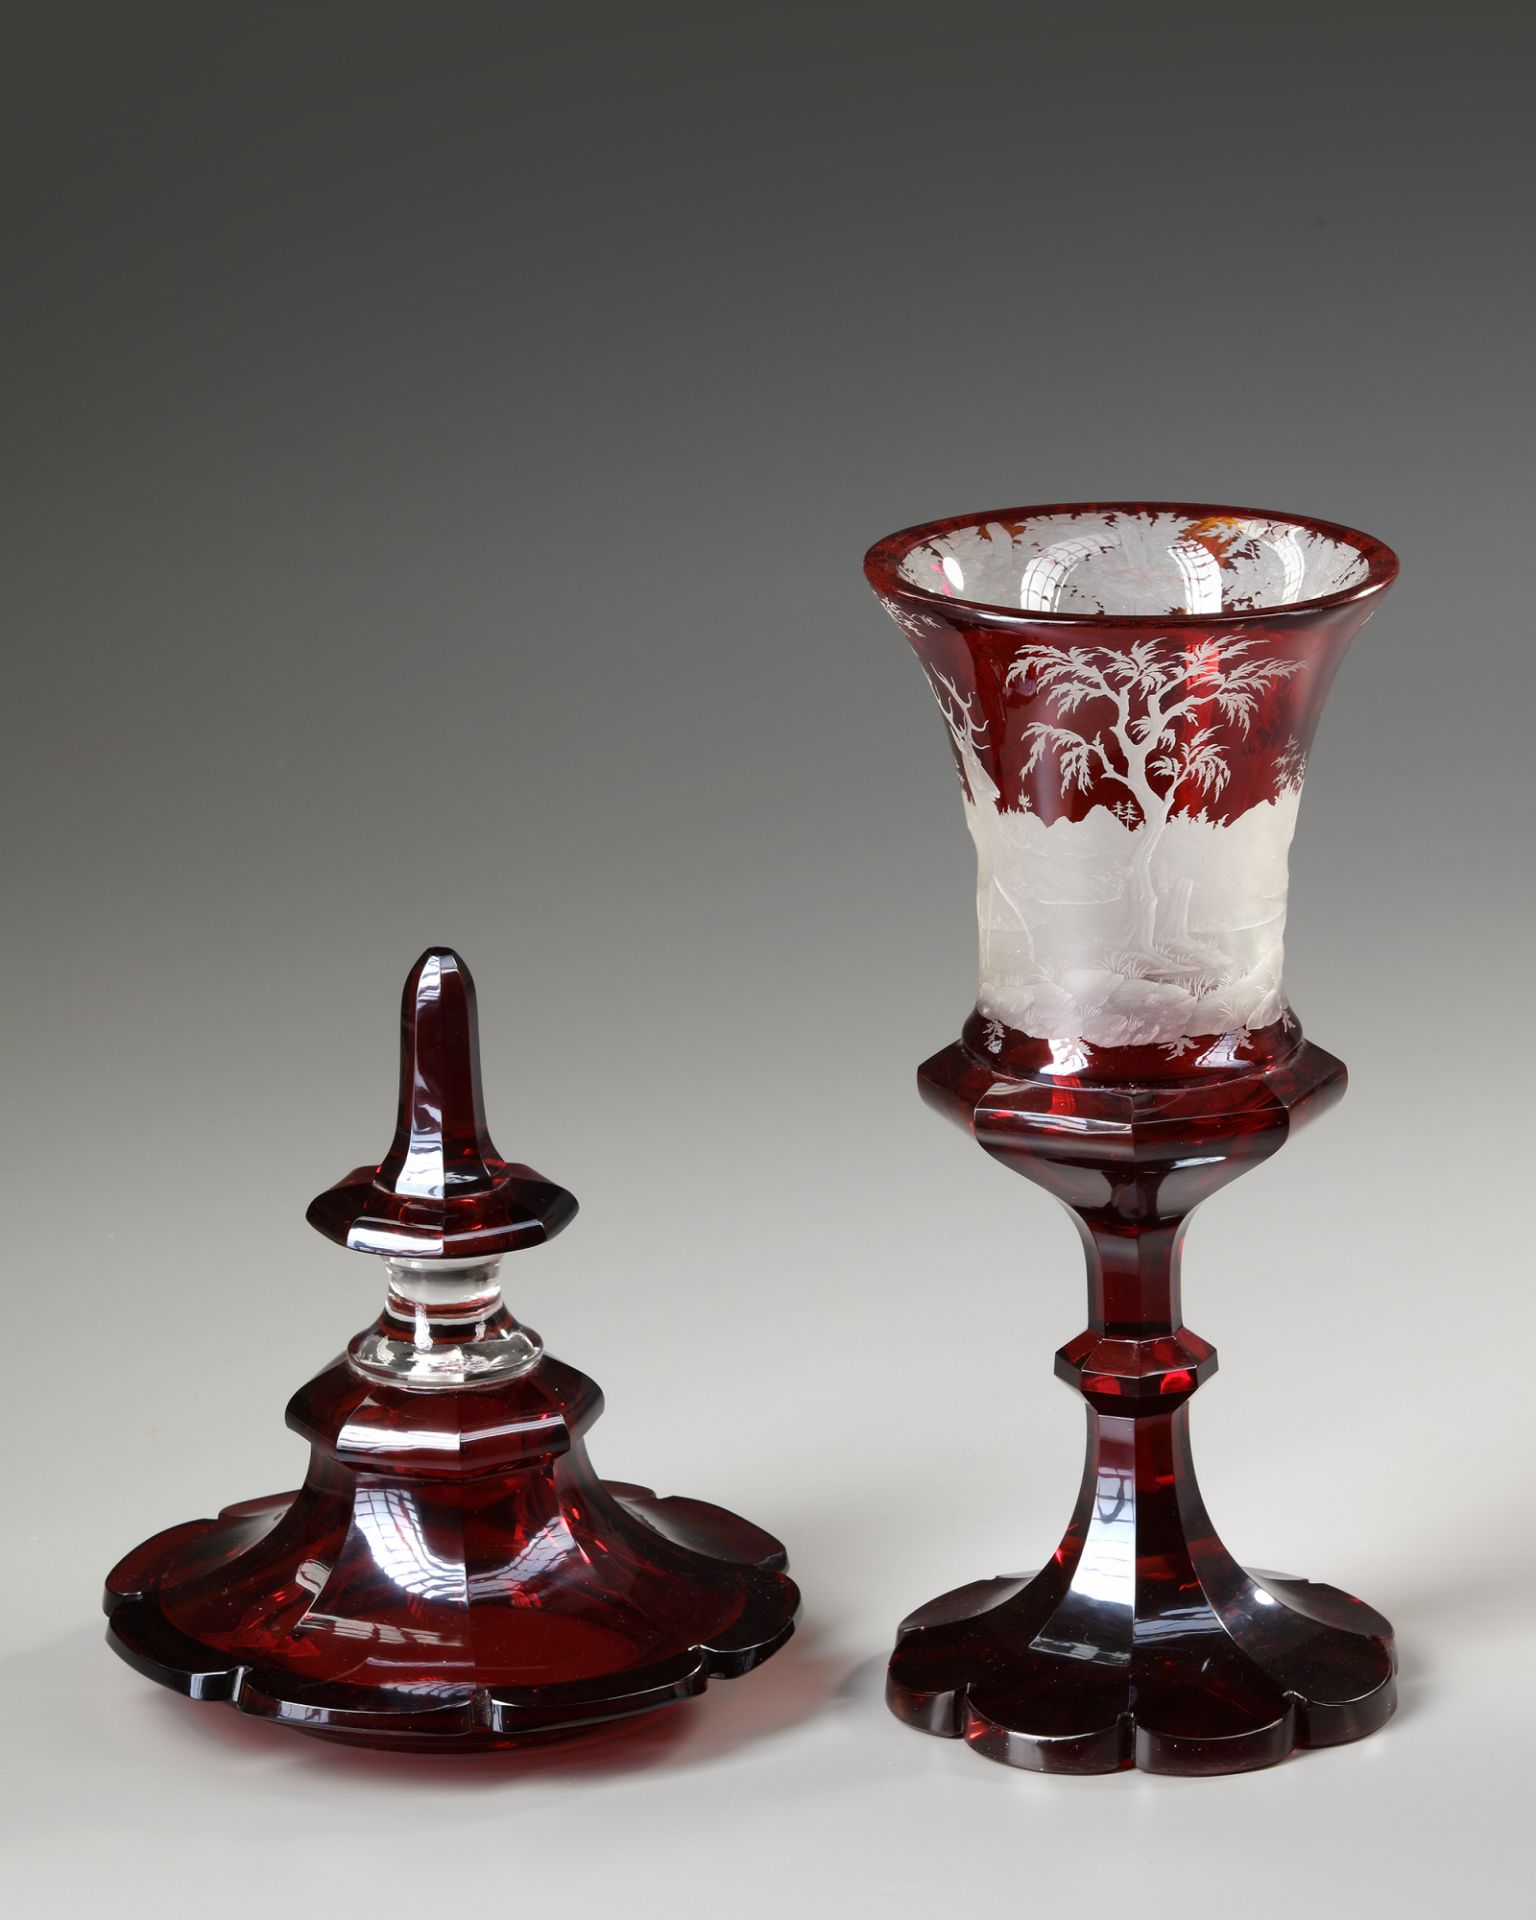 A BOHEMIAN RED GLASS GOBLET, LATE 19TH CENTURY - Image 2 of 3